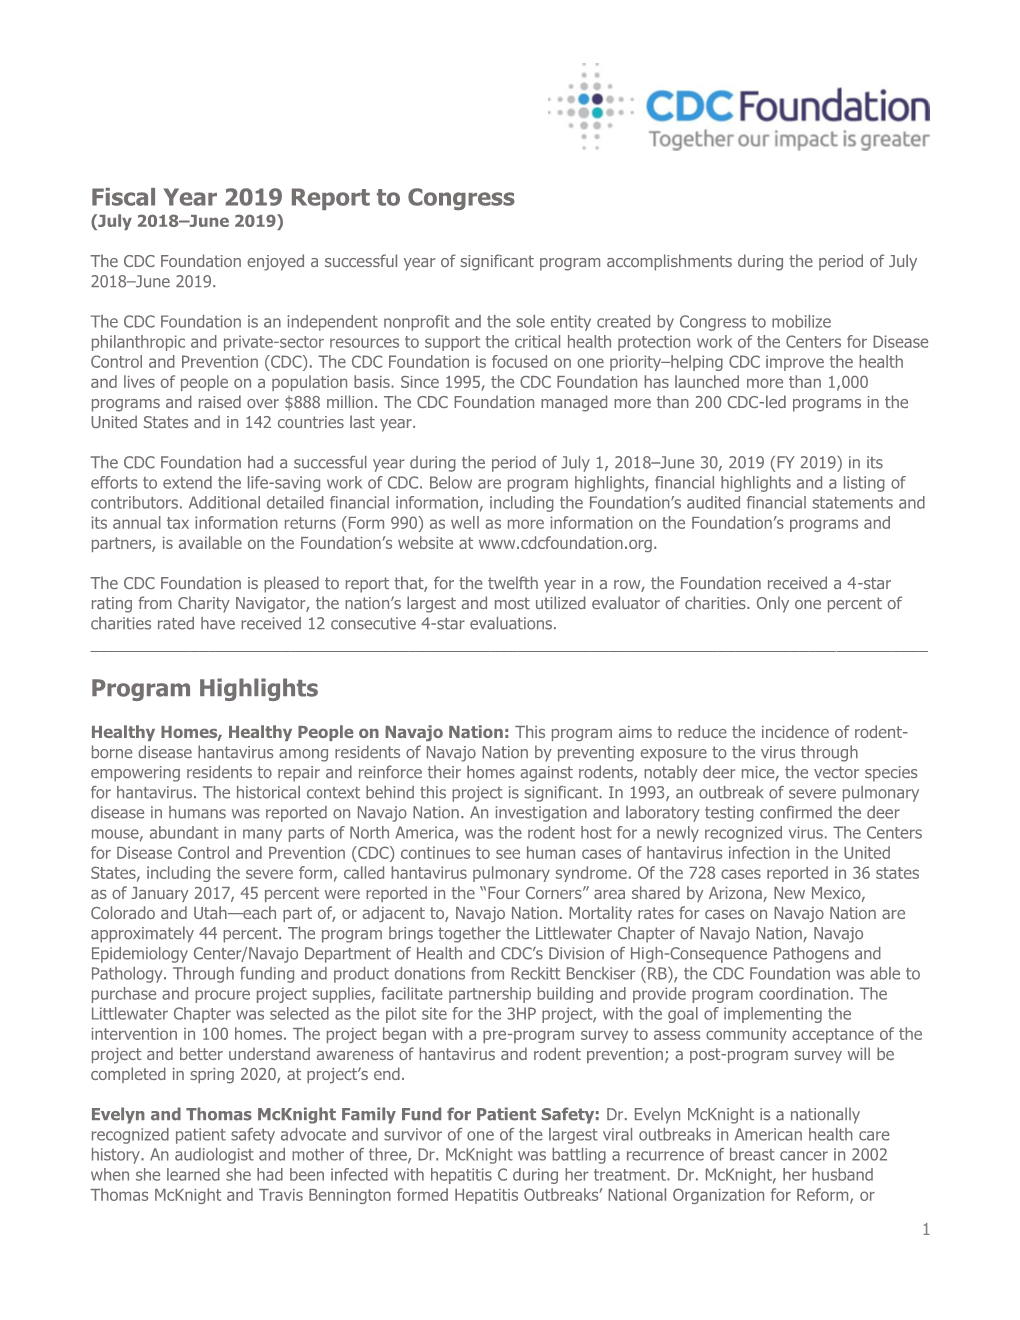 Fiscal Year 2019 Report to Congress Program Highlights